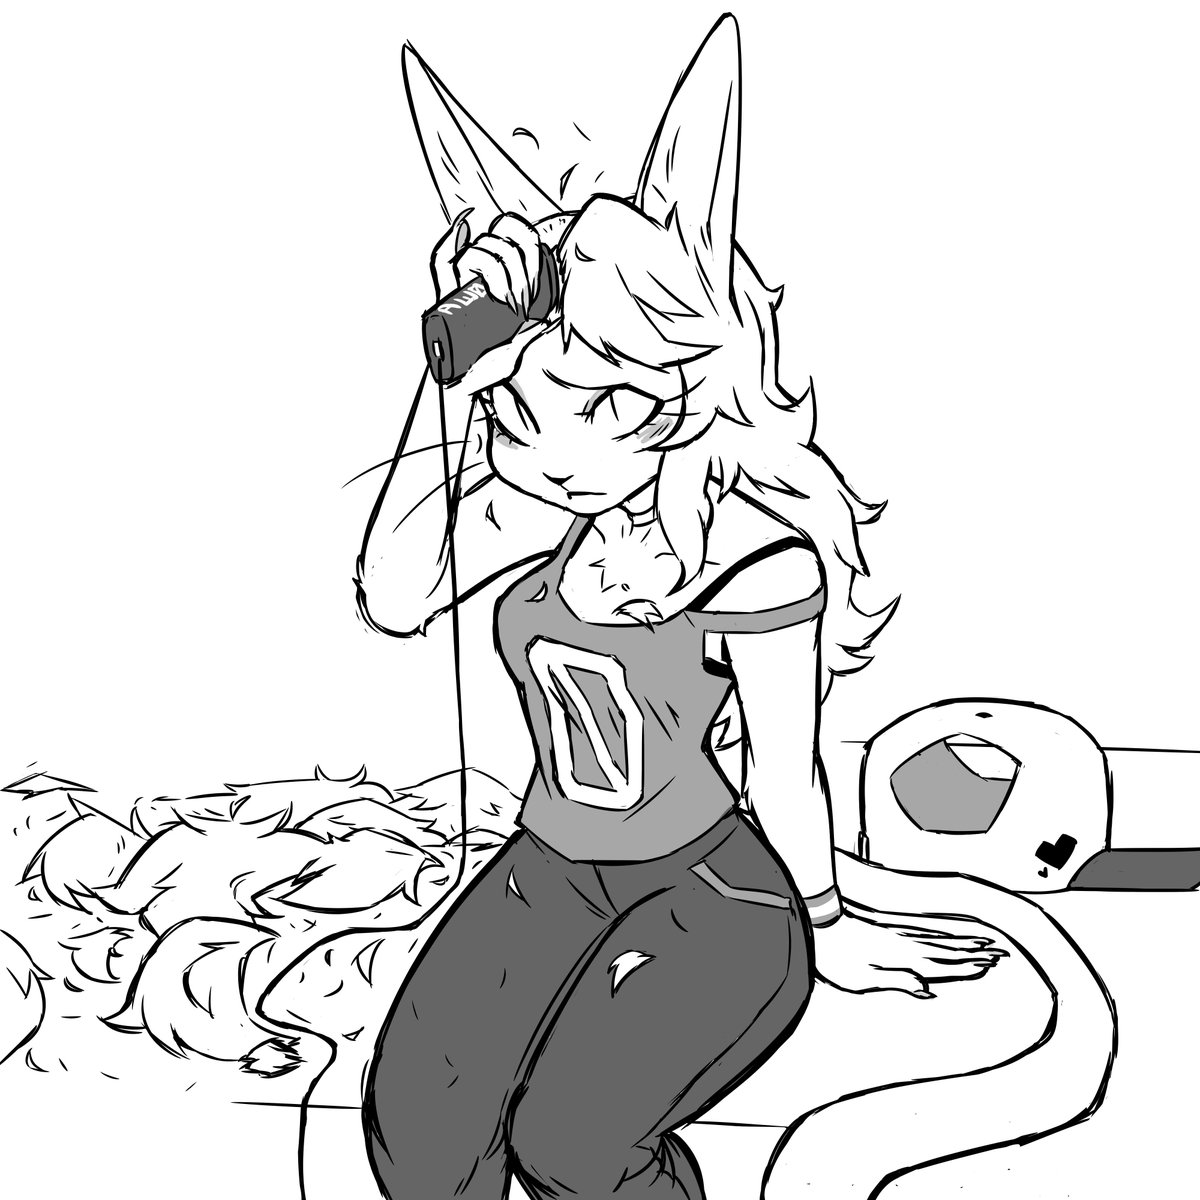 Aw0 Comms Opening Soon On Twitter Sketch Comm For Mawaruzero Thanks Alot 3c This Was A Super Fun One Marisha Cat Catgirl Anthro Hair Commissions Sketch Art Https T Co Titcqb0owh